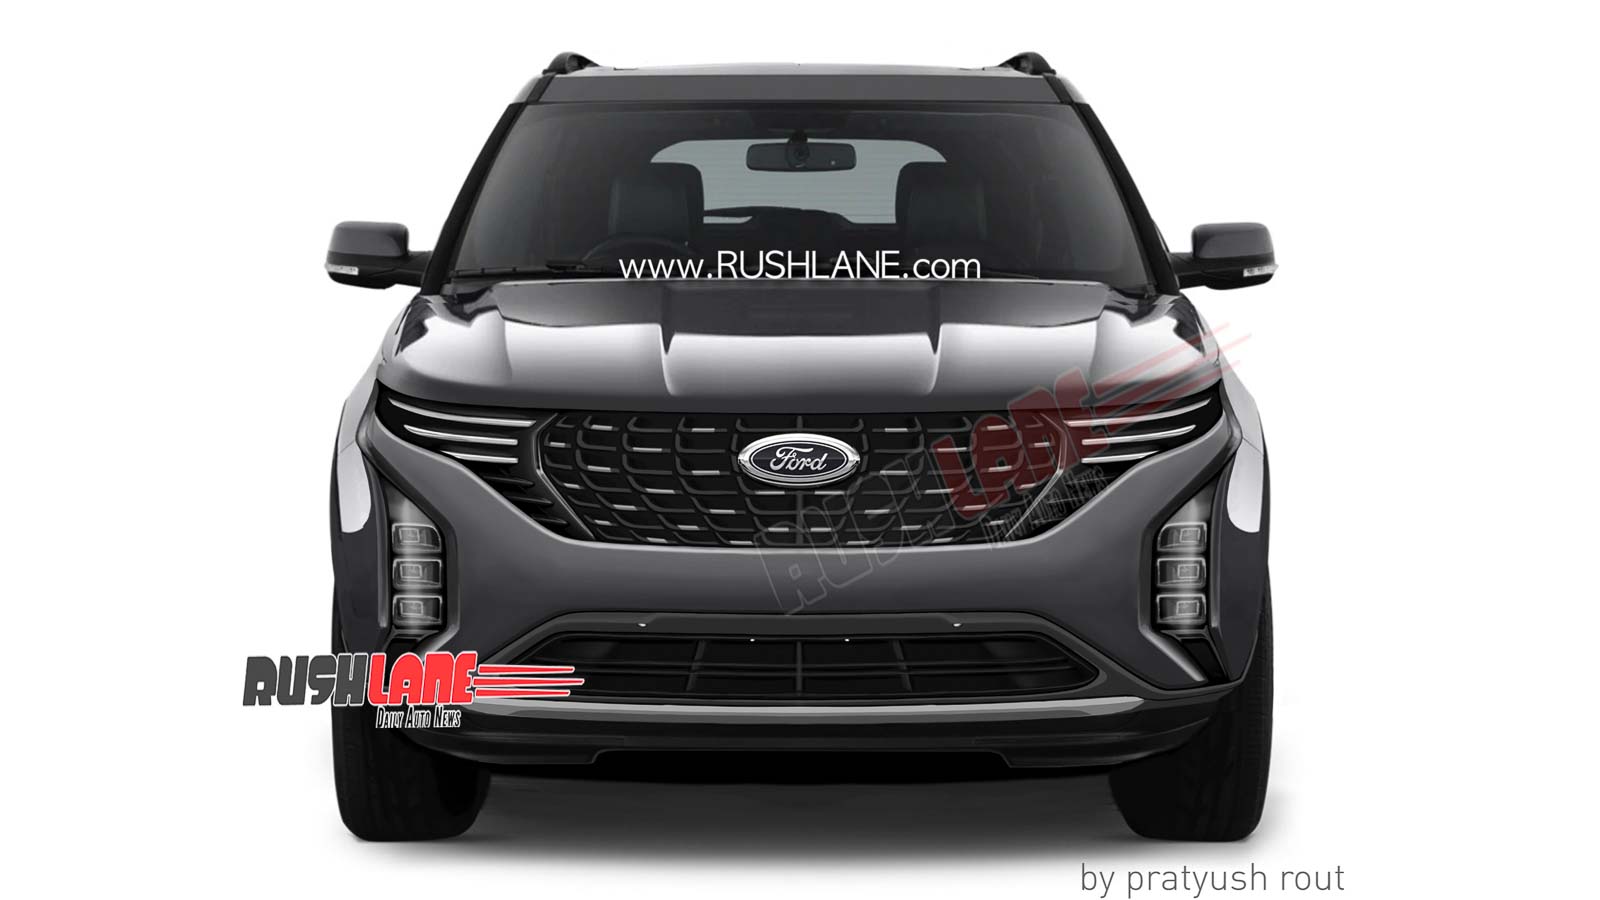 New Ford SUV For India CX757 Rendered - Based On 7 Seater ...